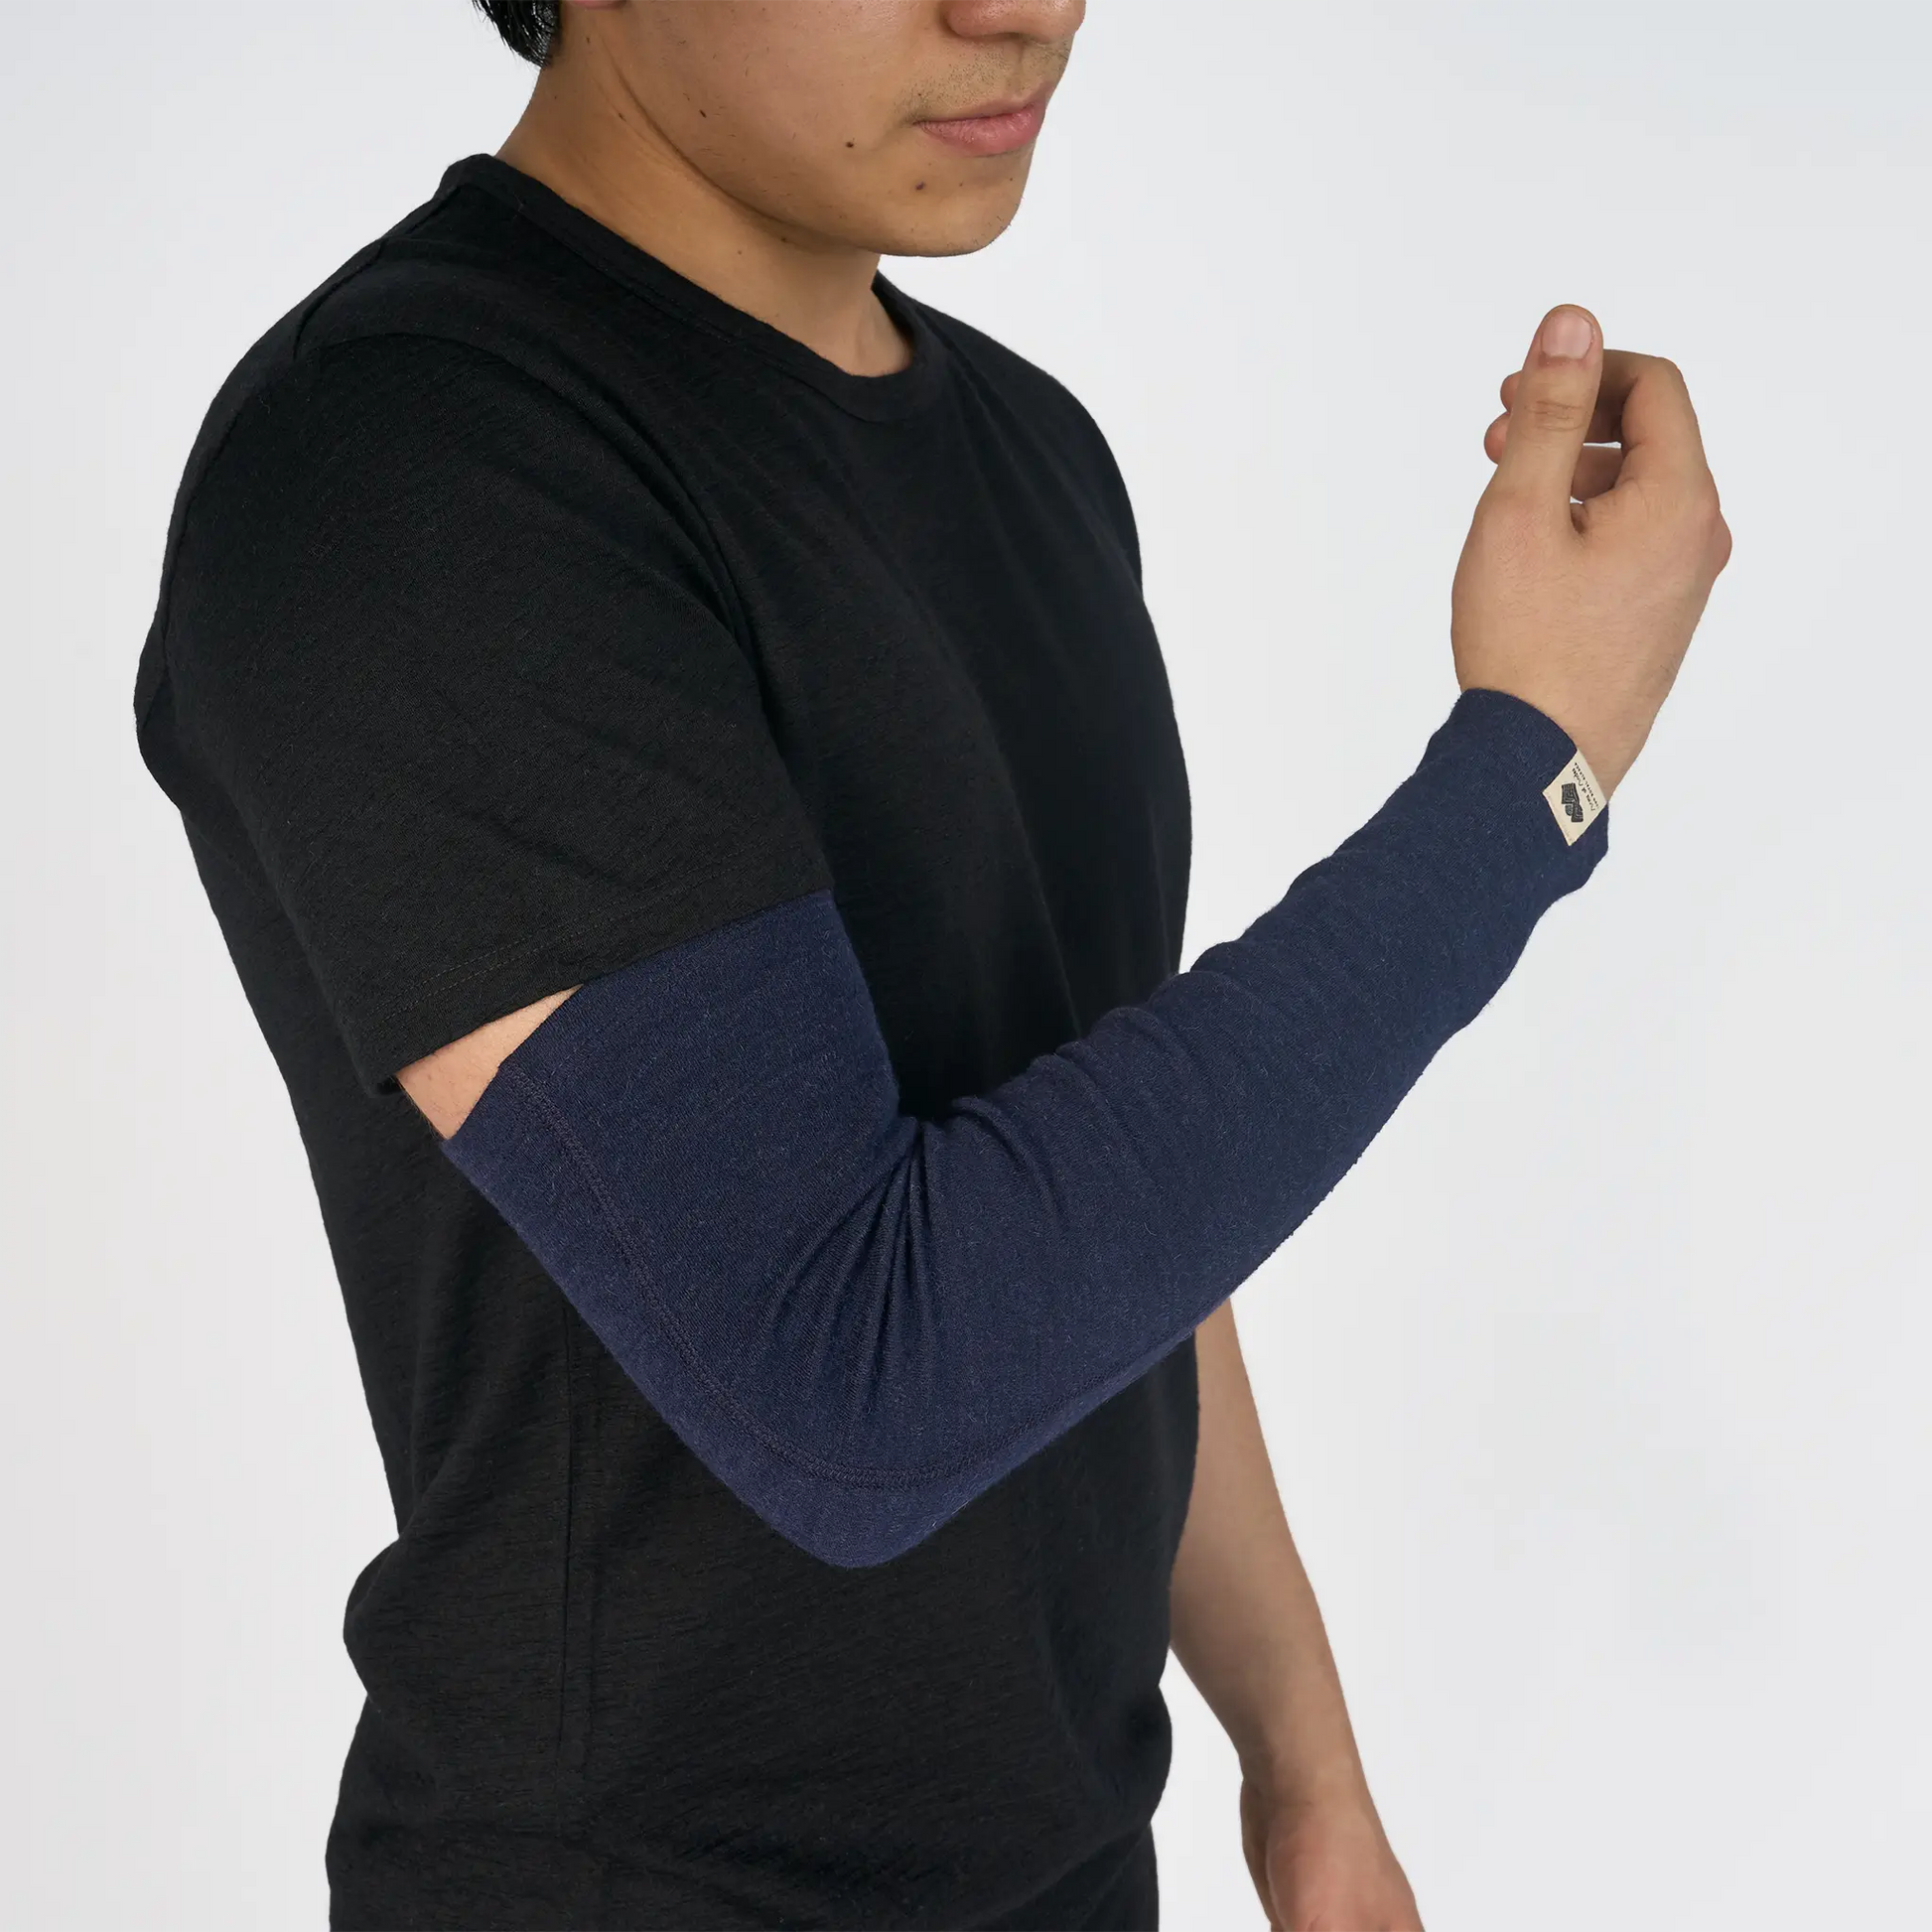 mens wind protection sleeve midweight color navy blue